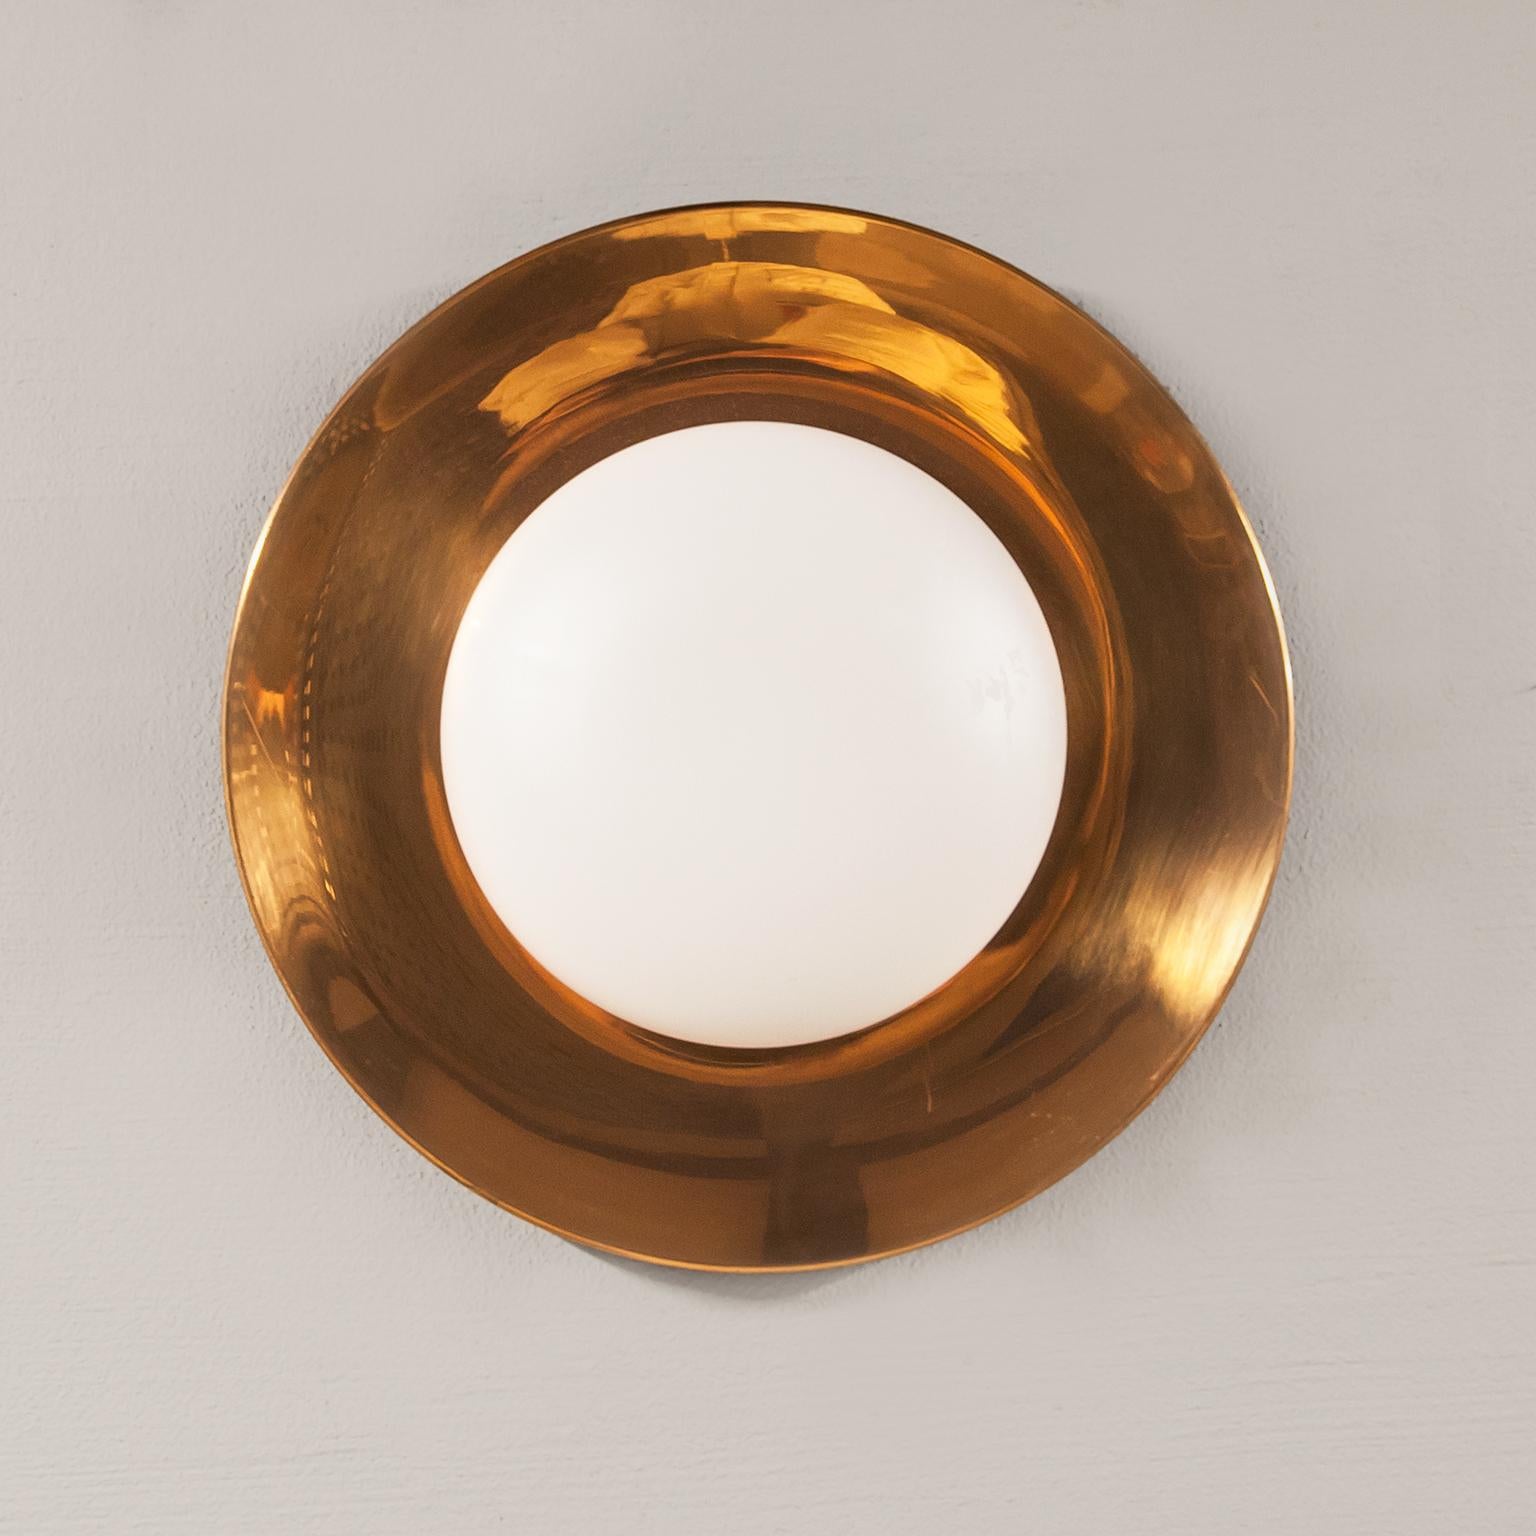 Elegant wall light made in copper and frosted glass manufactured by Philips Netherland in the 1960s.